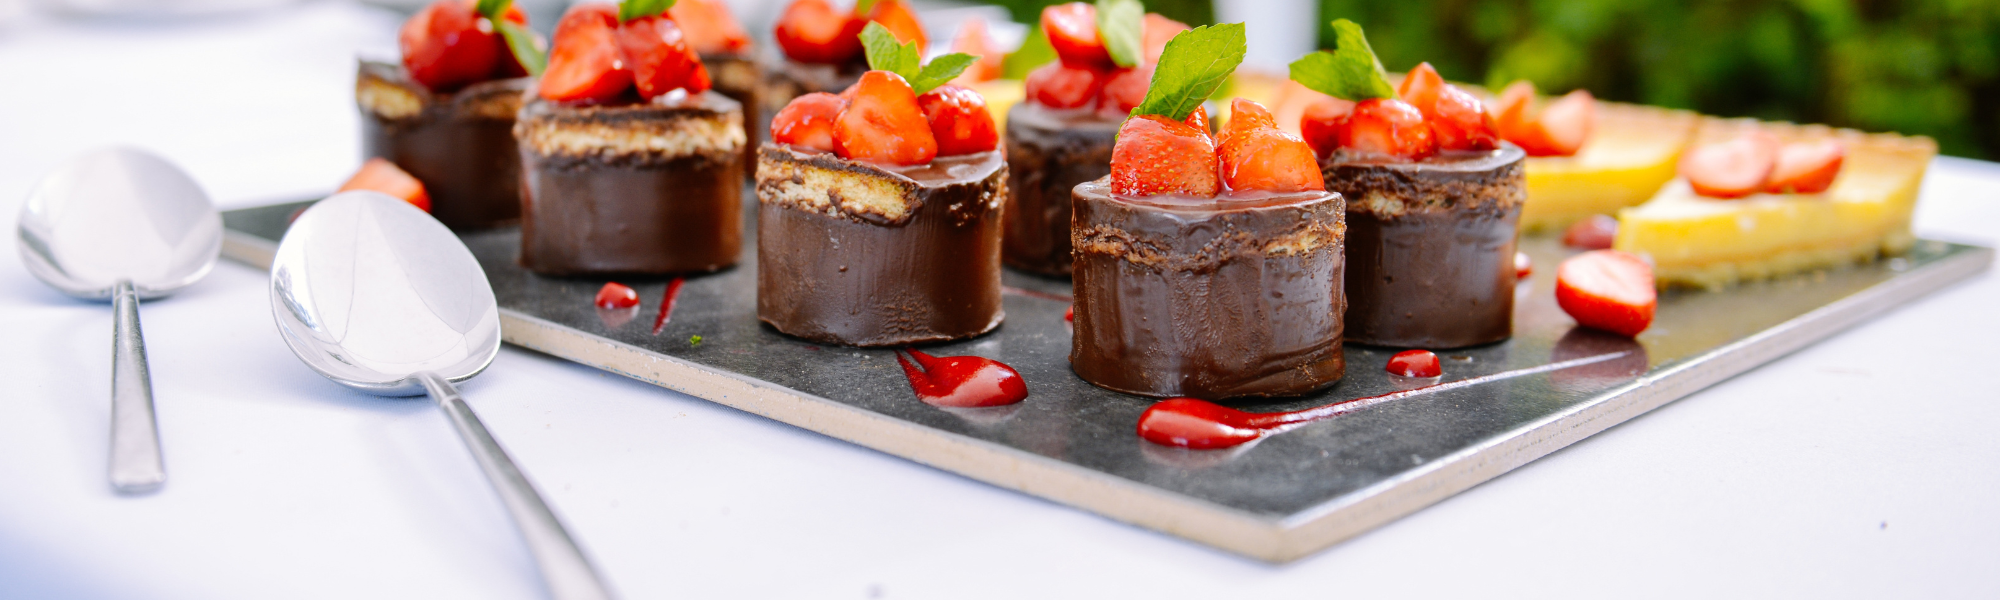 delicious chocolate mousse desserts on a tray 